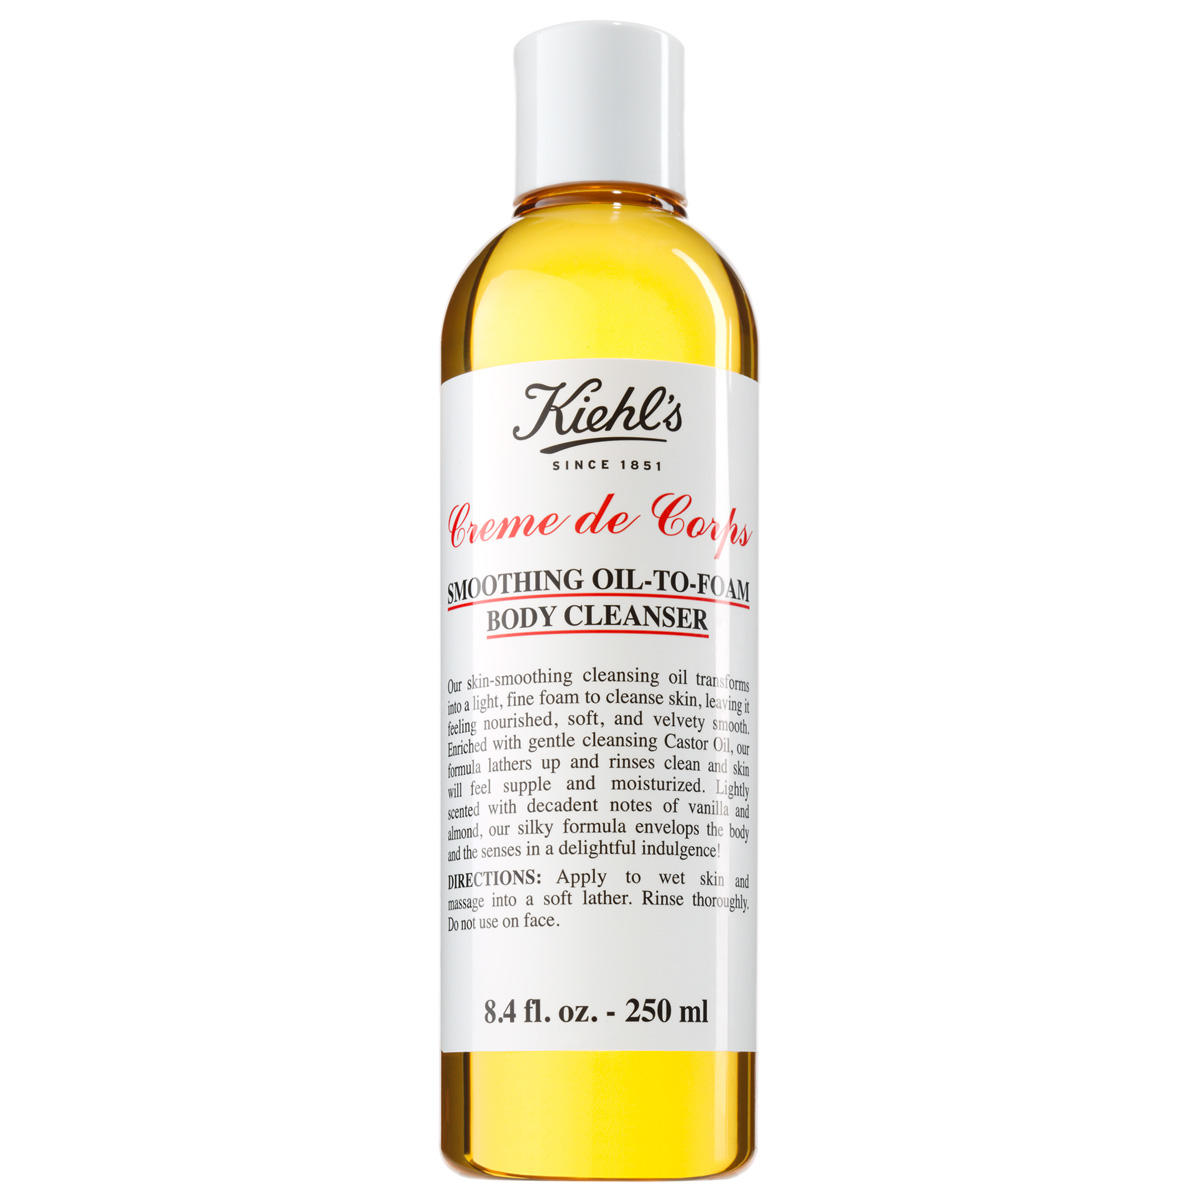 Kiehl's Creme de Corps Smoothing Oil-to-Foam Body Cleanser 250 ml - 1